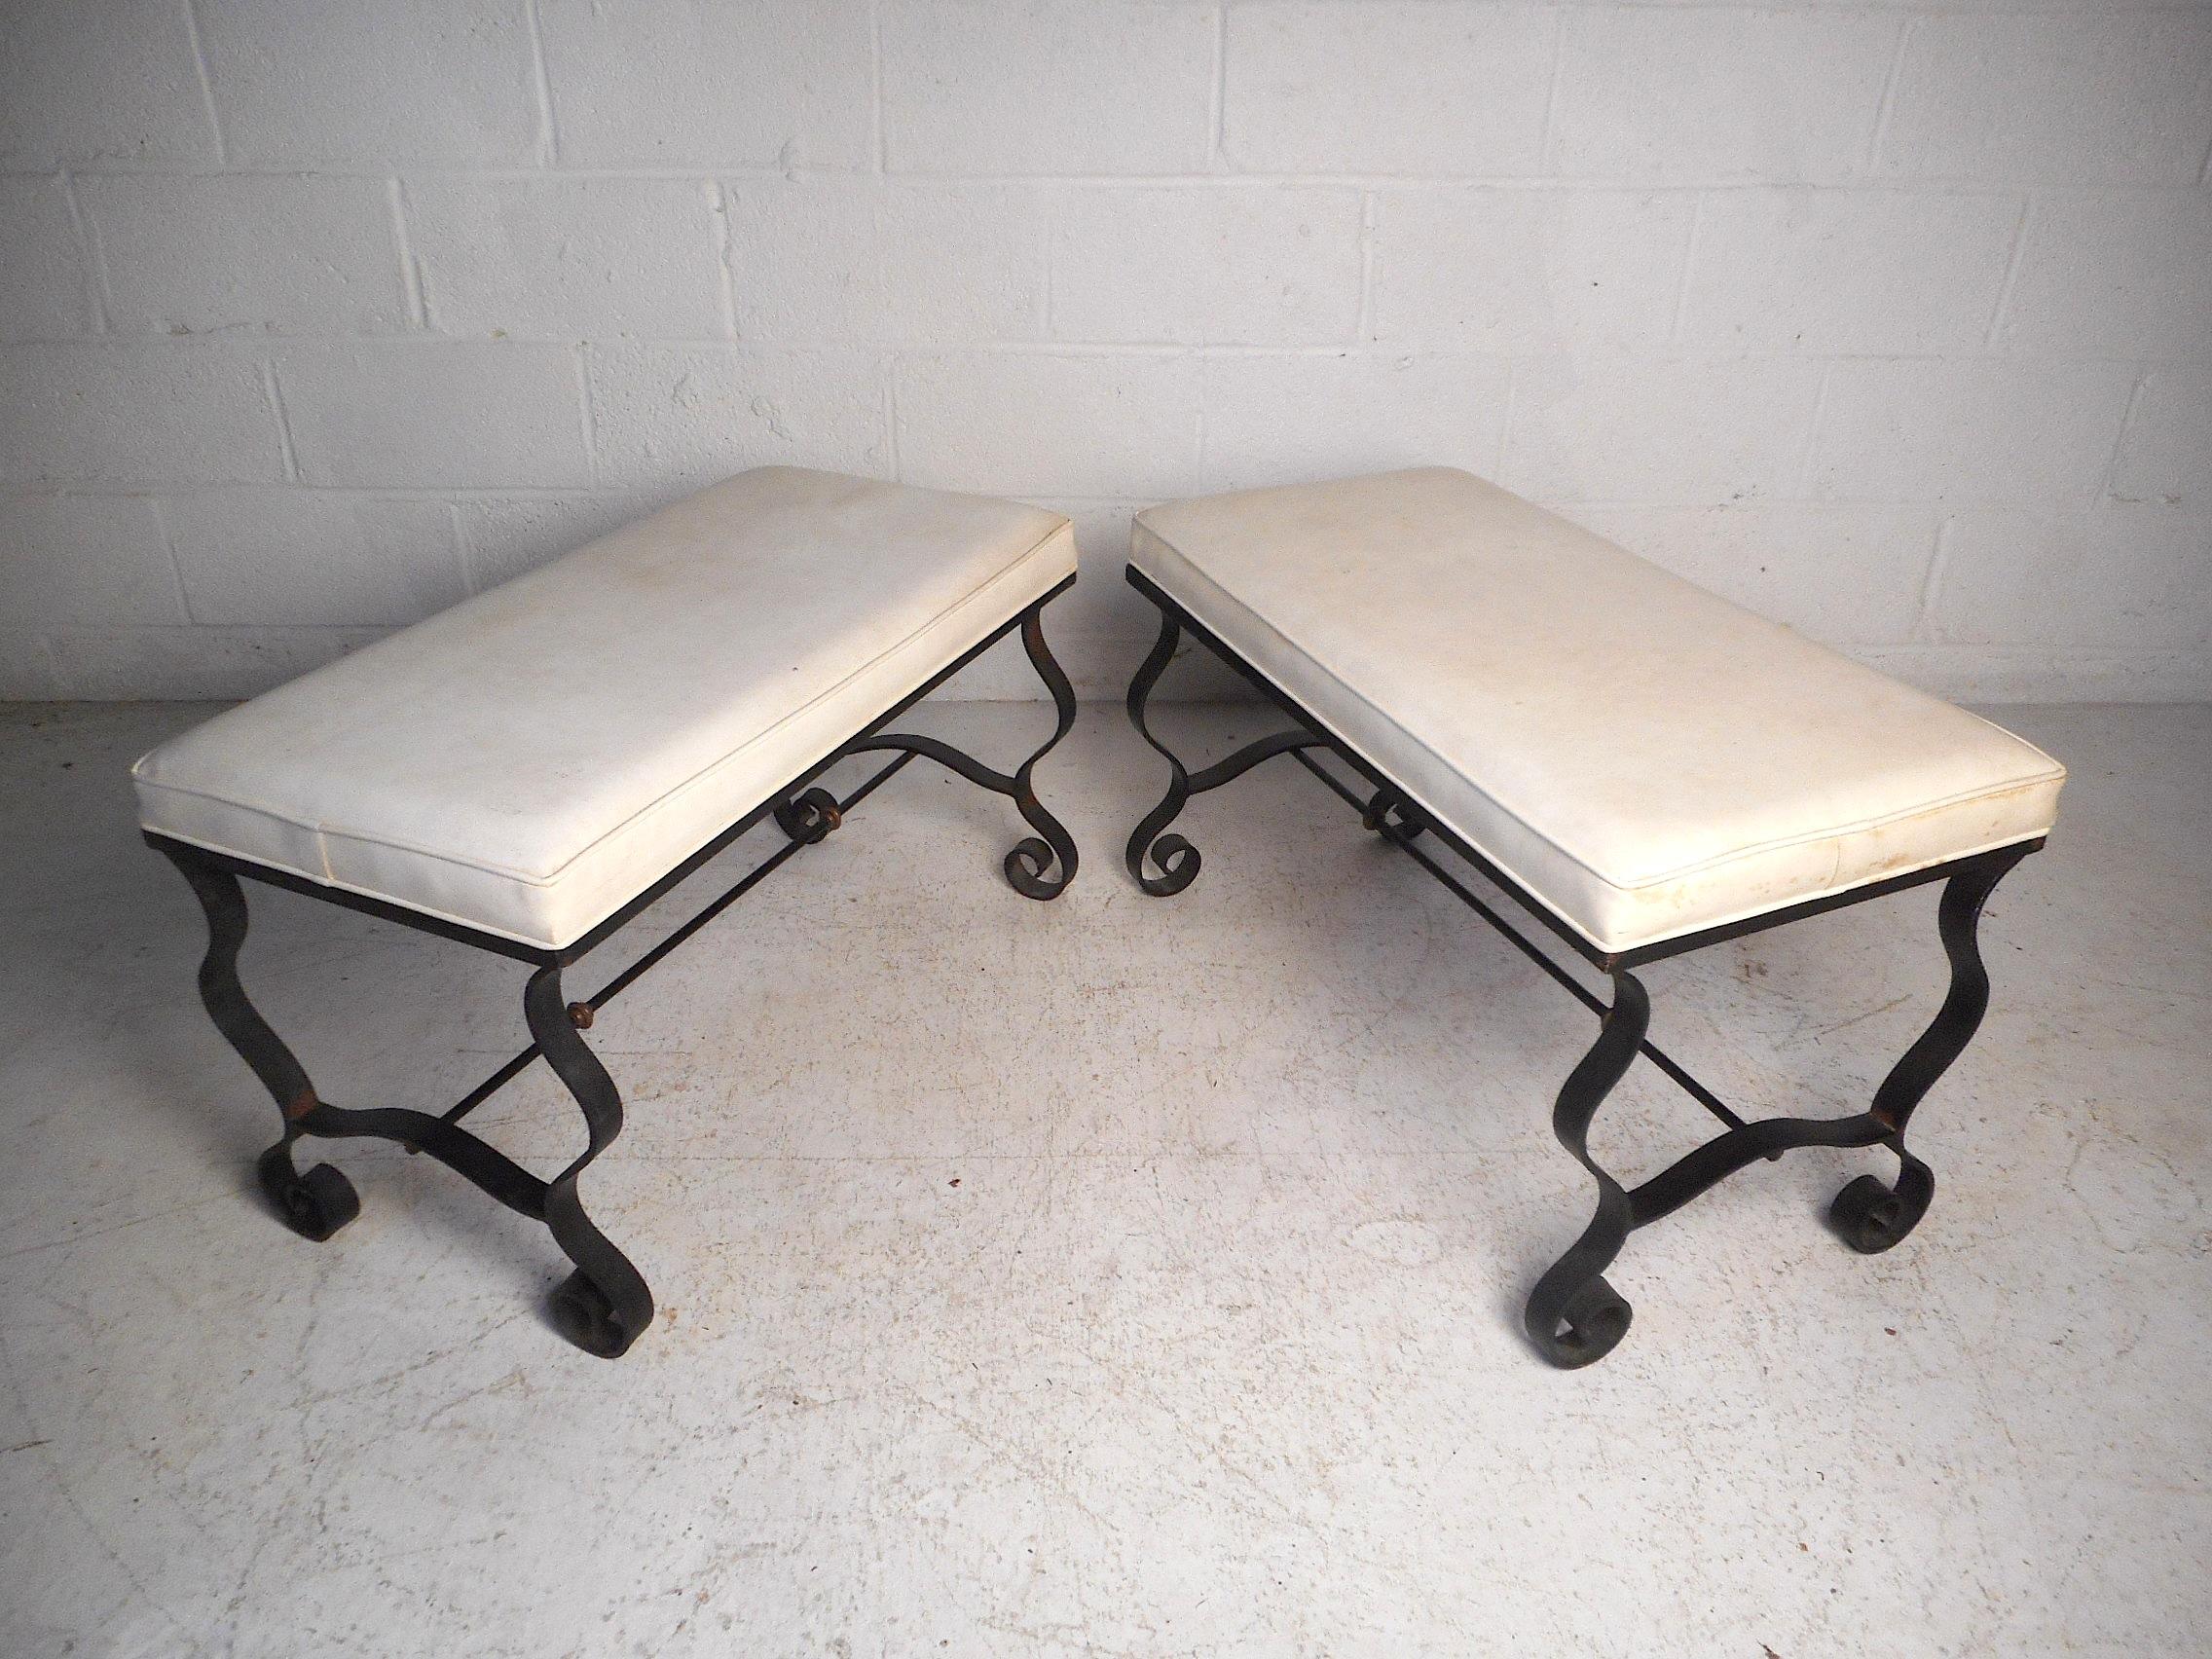 This impressive pair of midcentury benches feature sturdy and ornate iron frames, comfortable seating, and a white faux-leather upholstery. This pair would make a great addition to any modern interior. Please confirm item location with dealer (NJ or